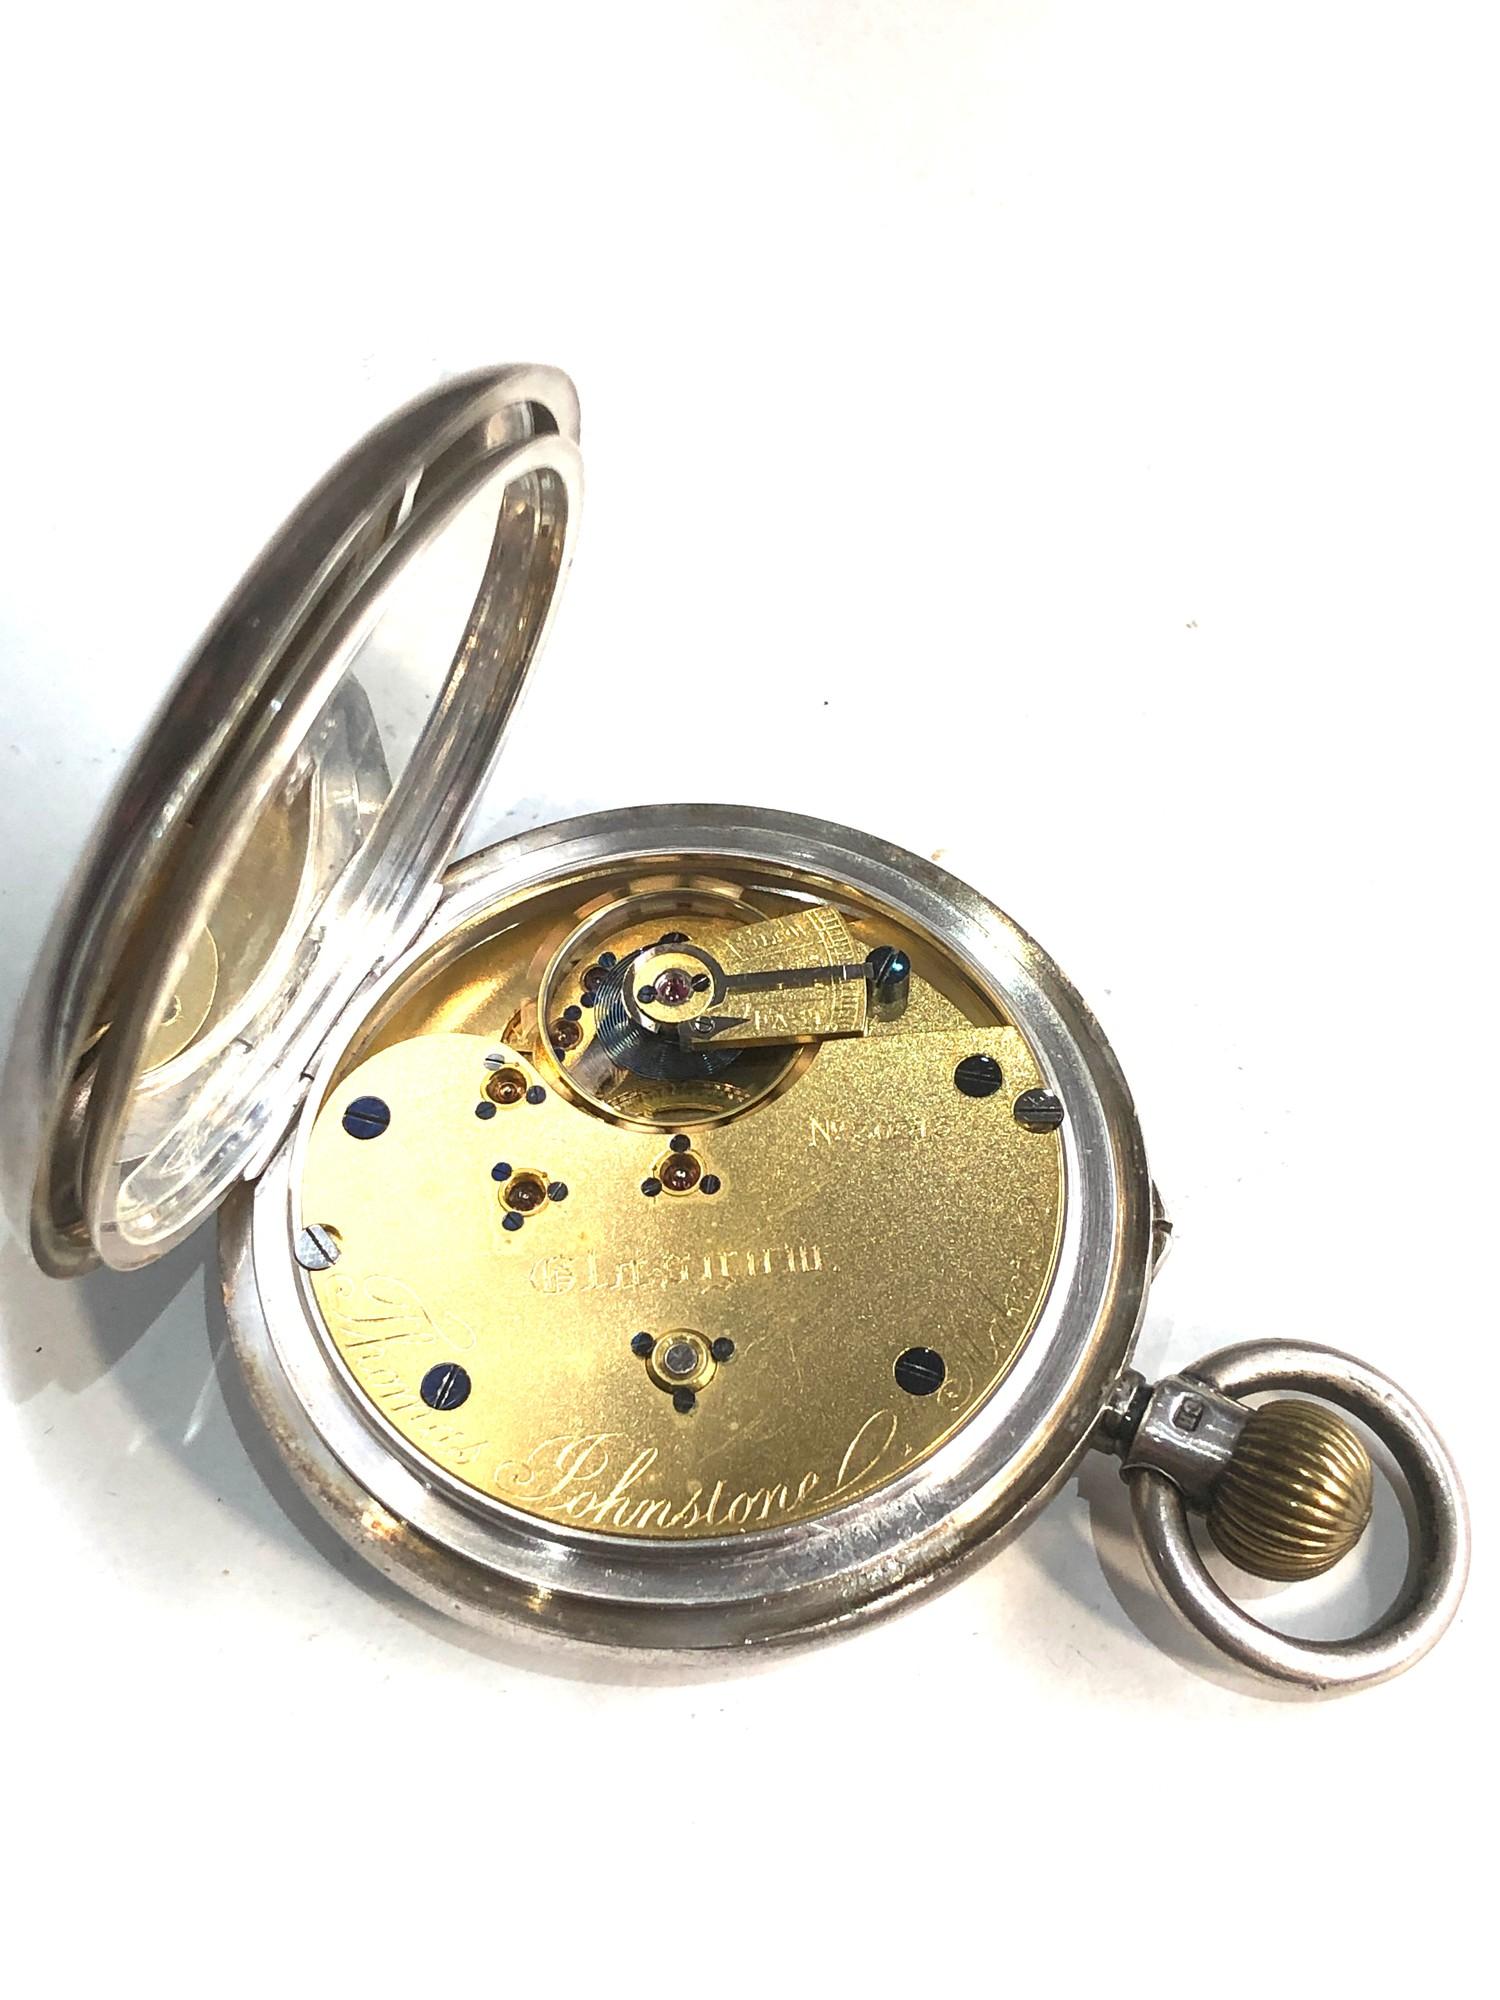 Antique silver open face pocket thomas johnstone glasgow the watch is ticking but no warranty - Image 4 of 5